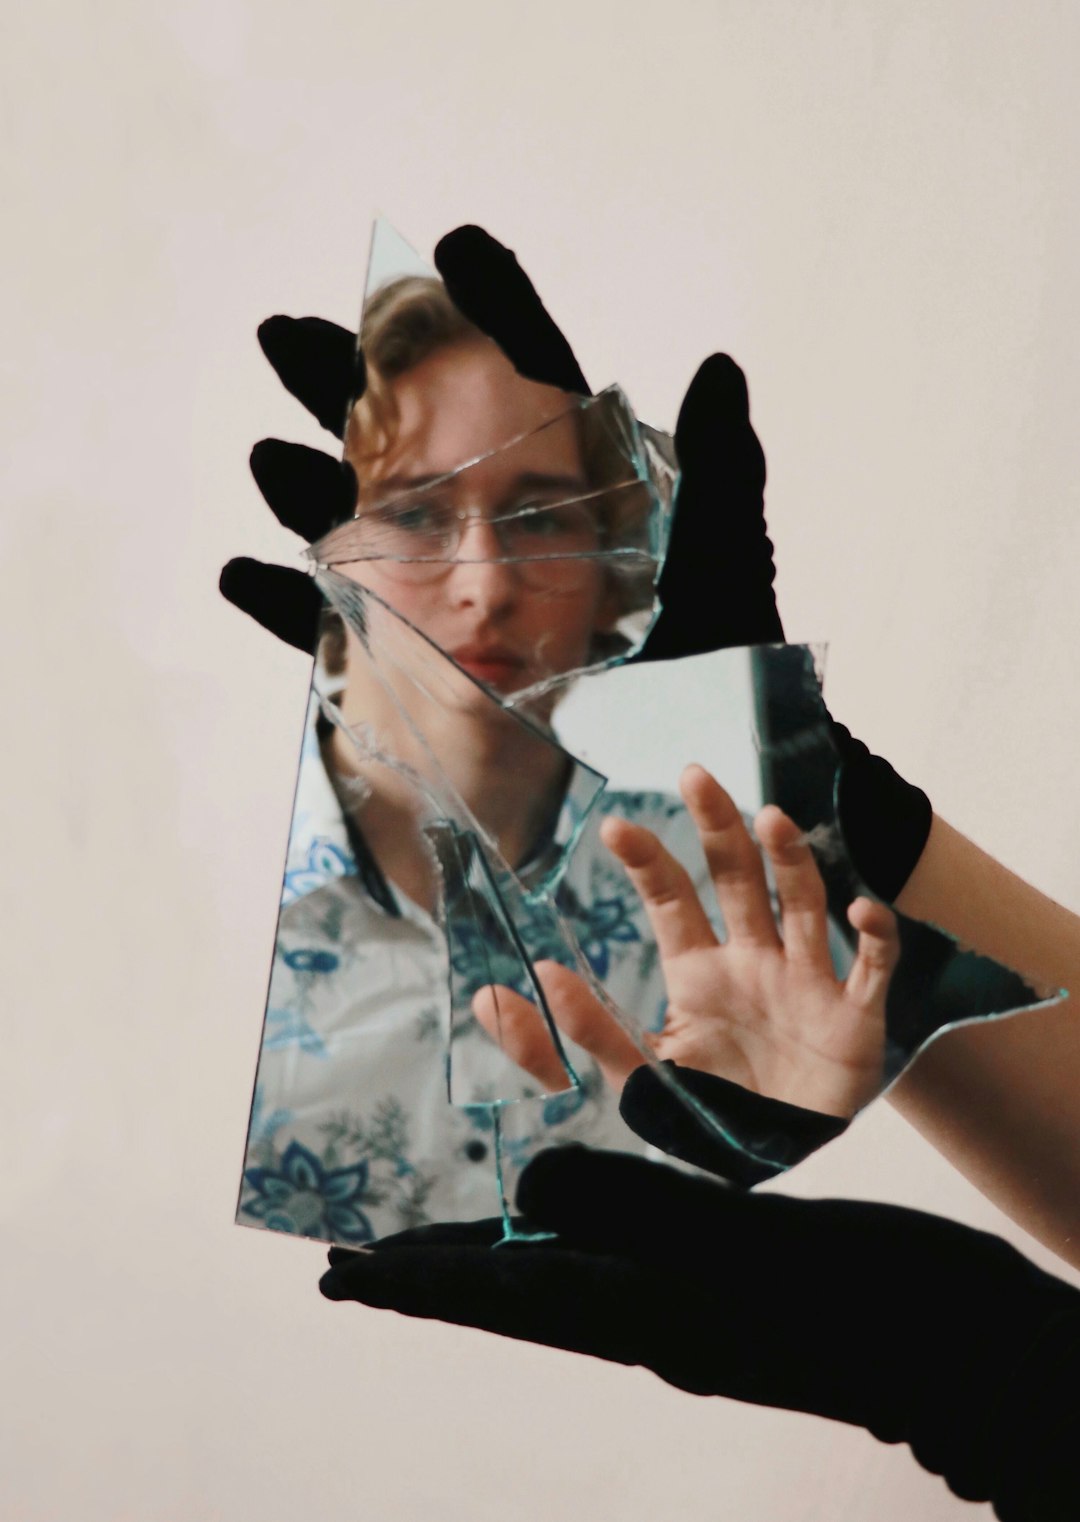  woman in black shirt covering face with hands mirror